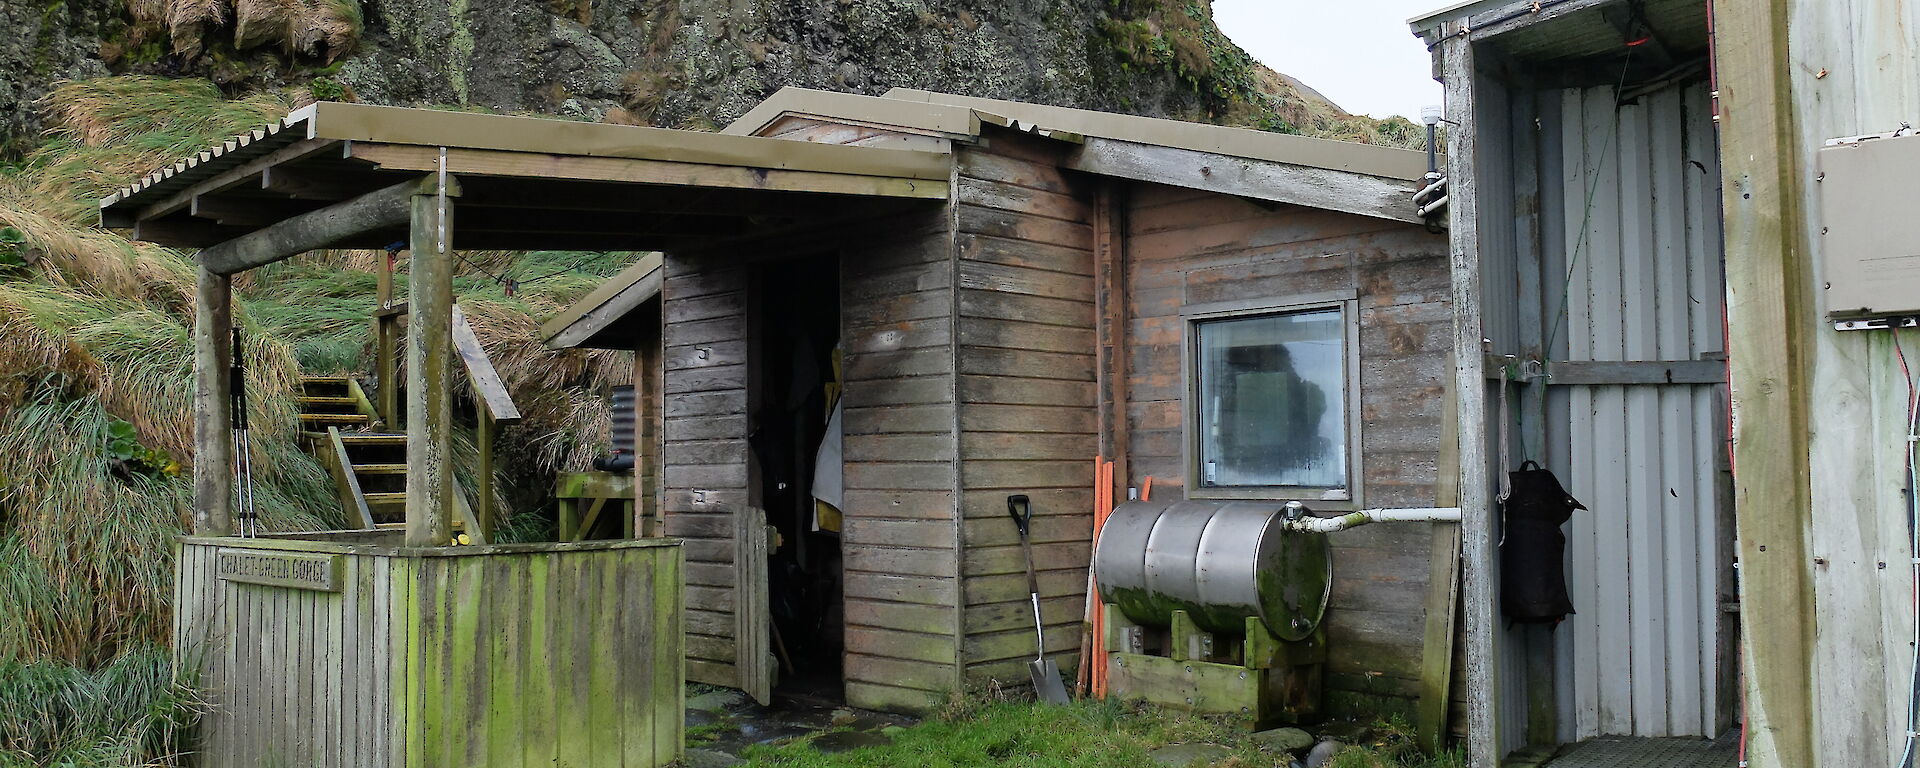 Green Gorge hut showing a tank outside the hut with pipe feed outside the hut